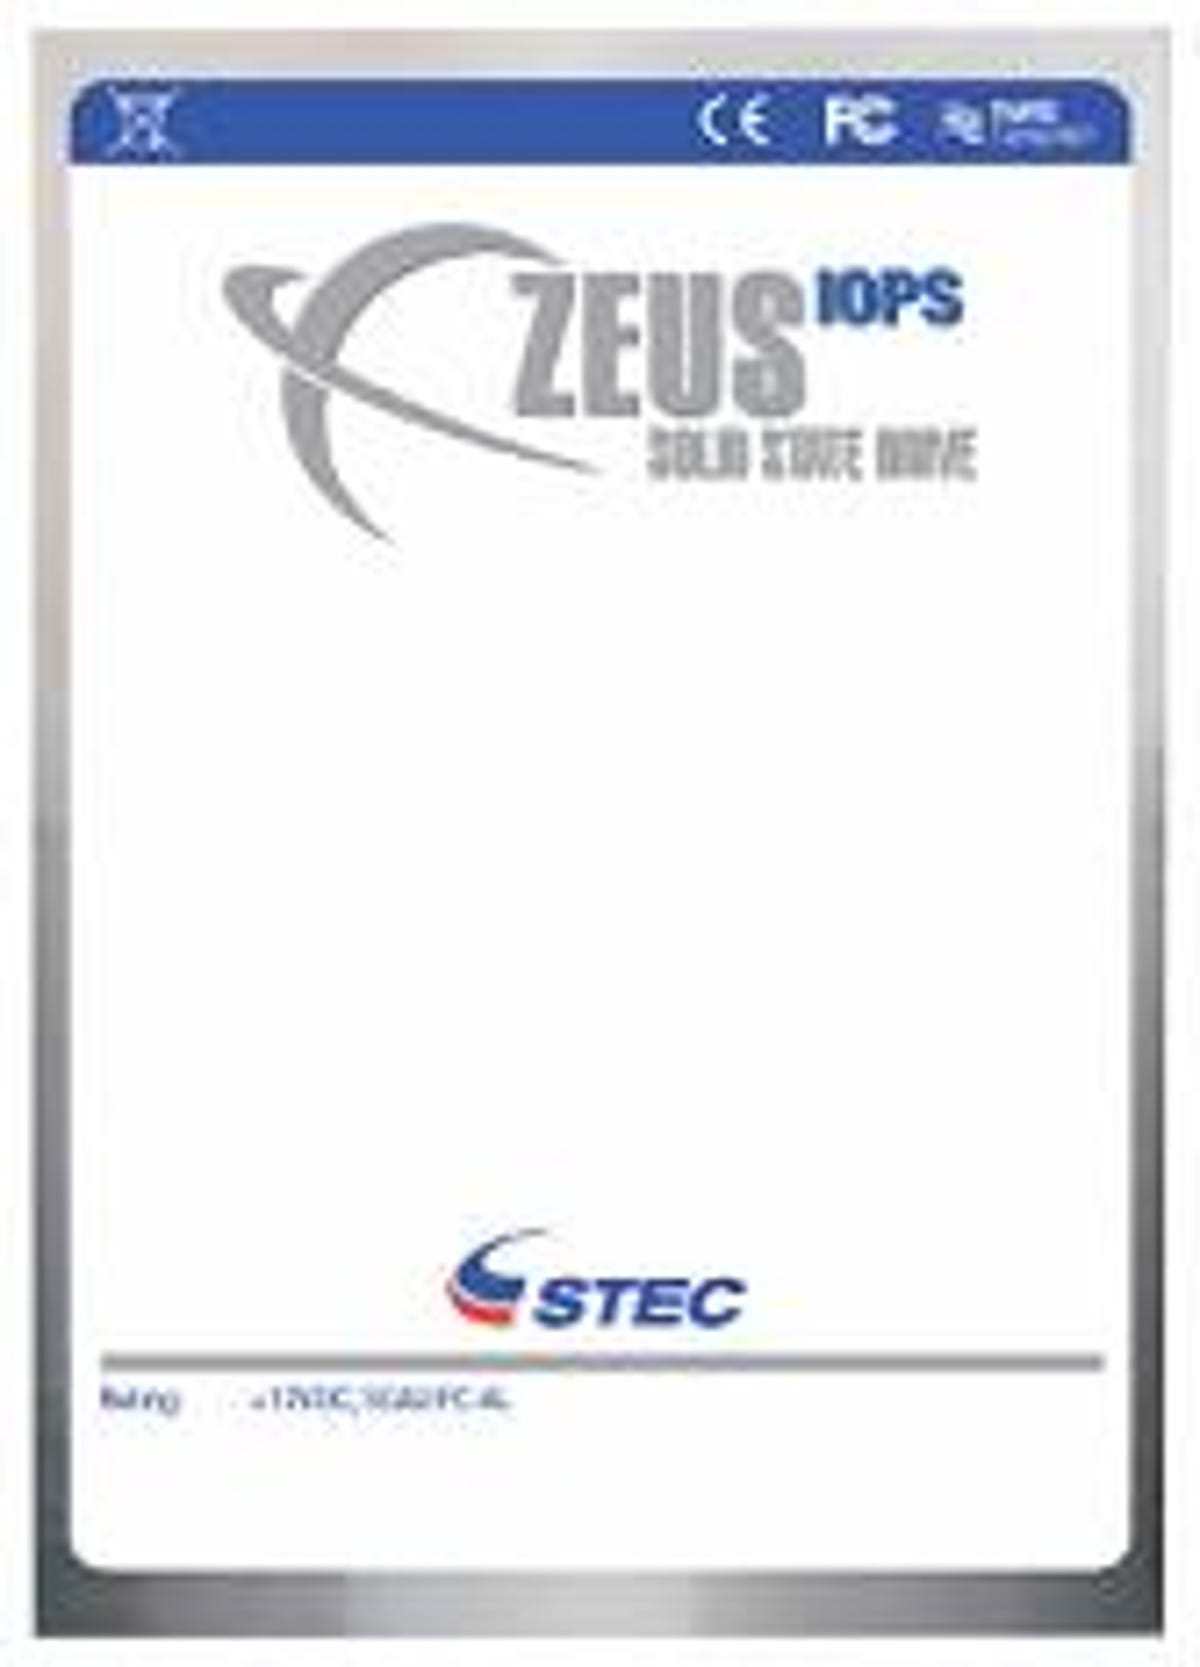 STEC solid state drive